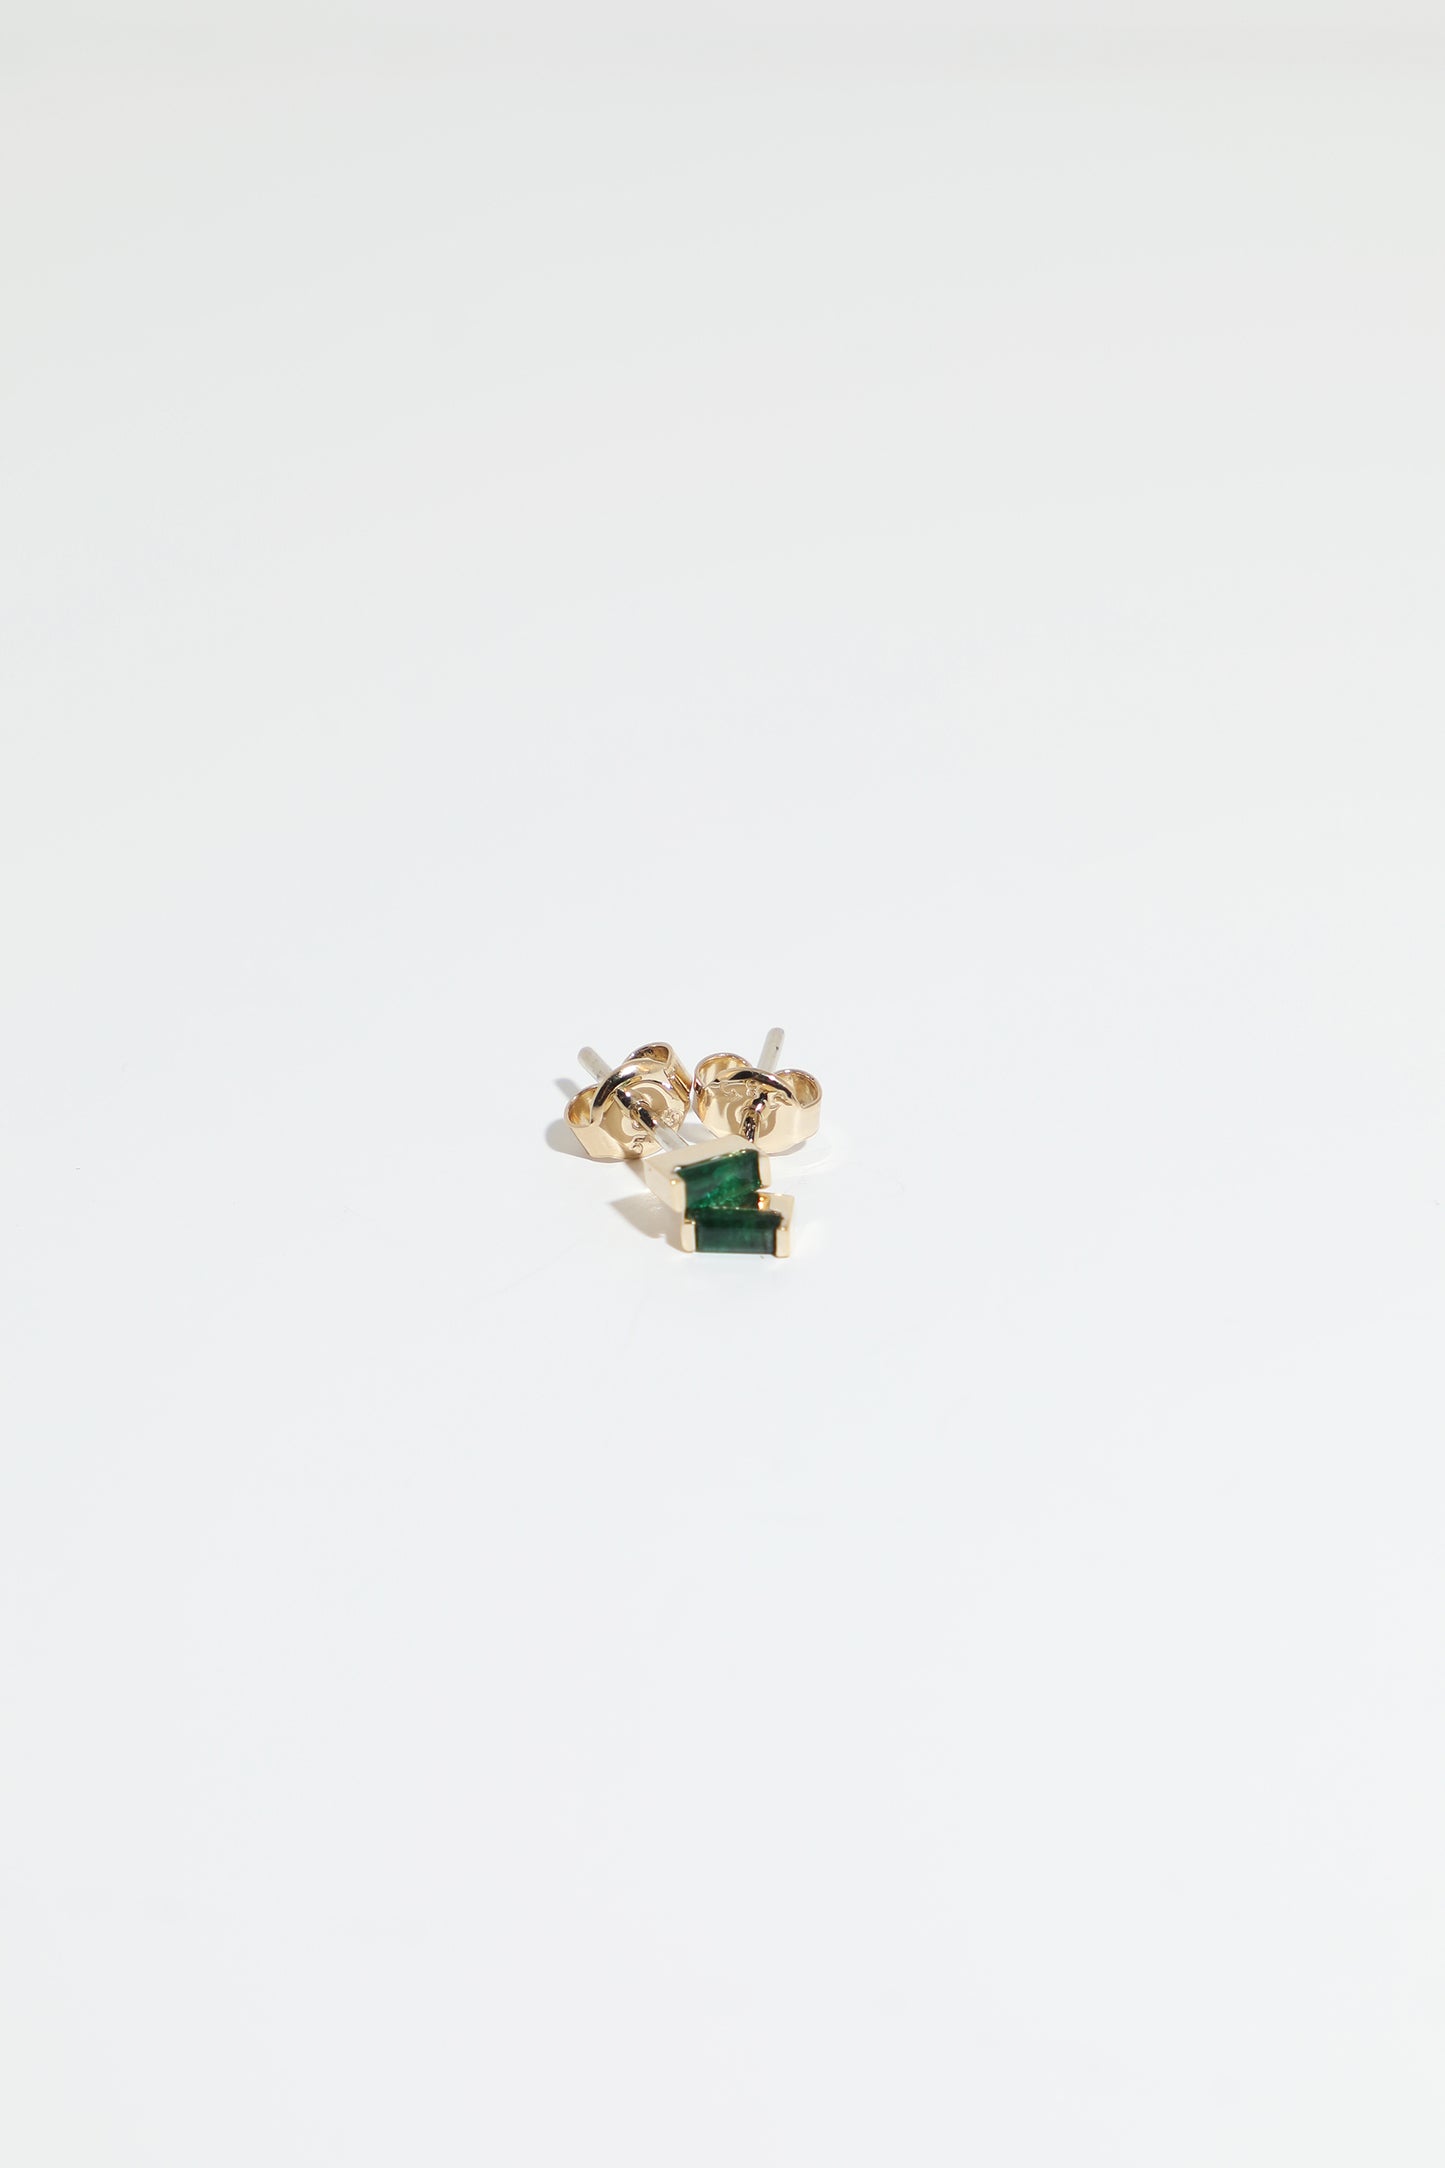 14K Gold and Emerald Baguette Earrings